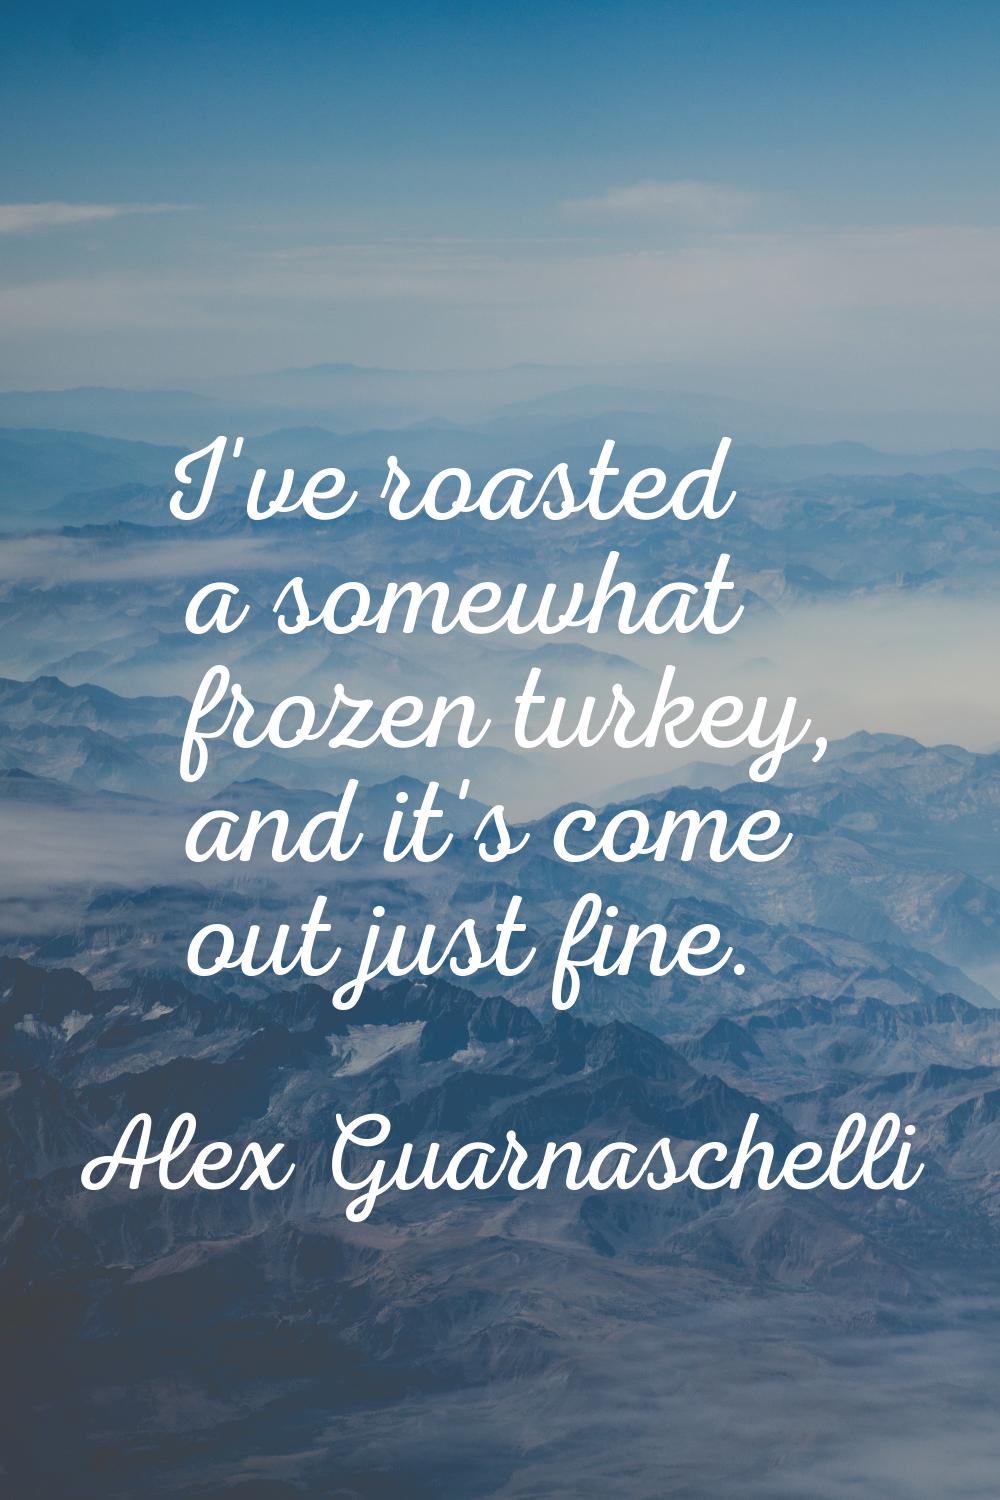 I've roasted a somewhat frozen turkey, and it's come out just fine.